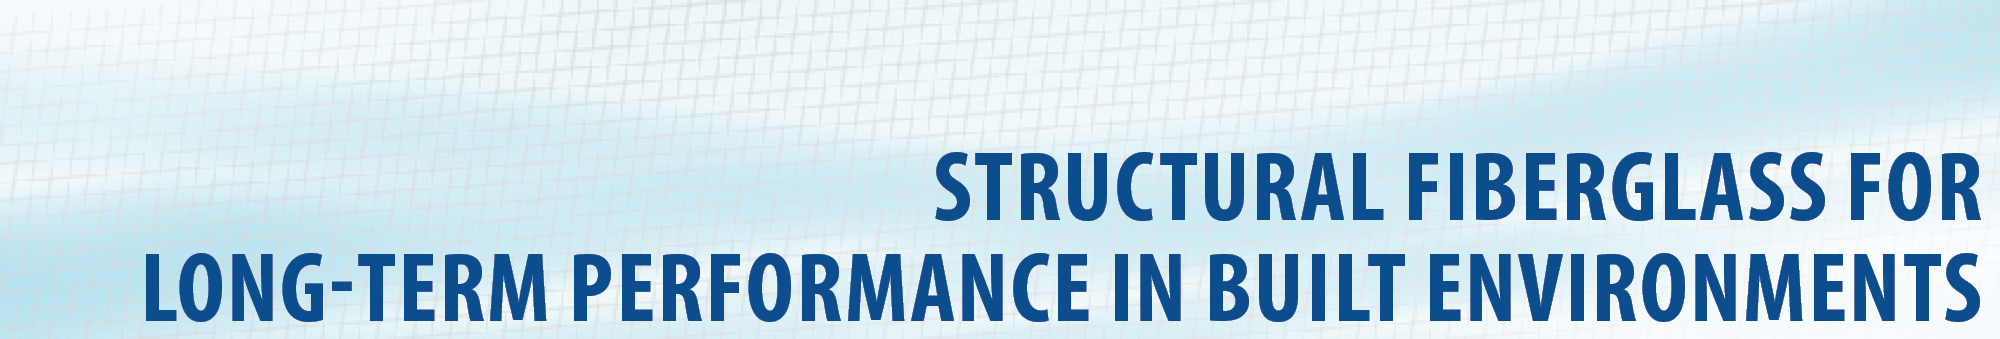 Structural Fiberglass for Long-Term Performance in Built Environments